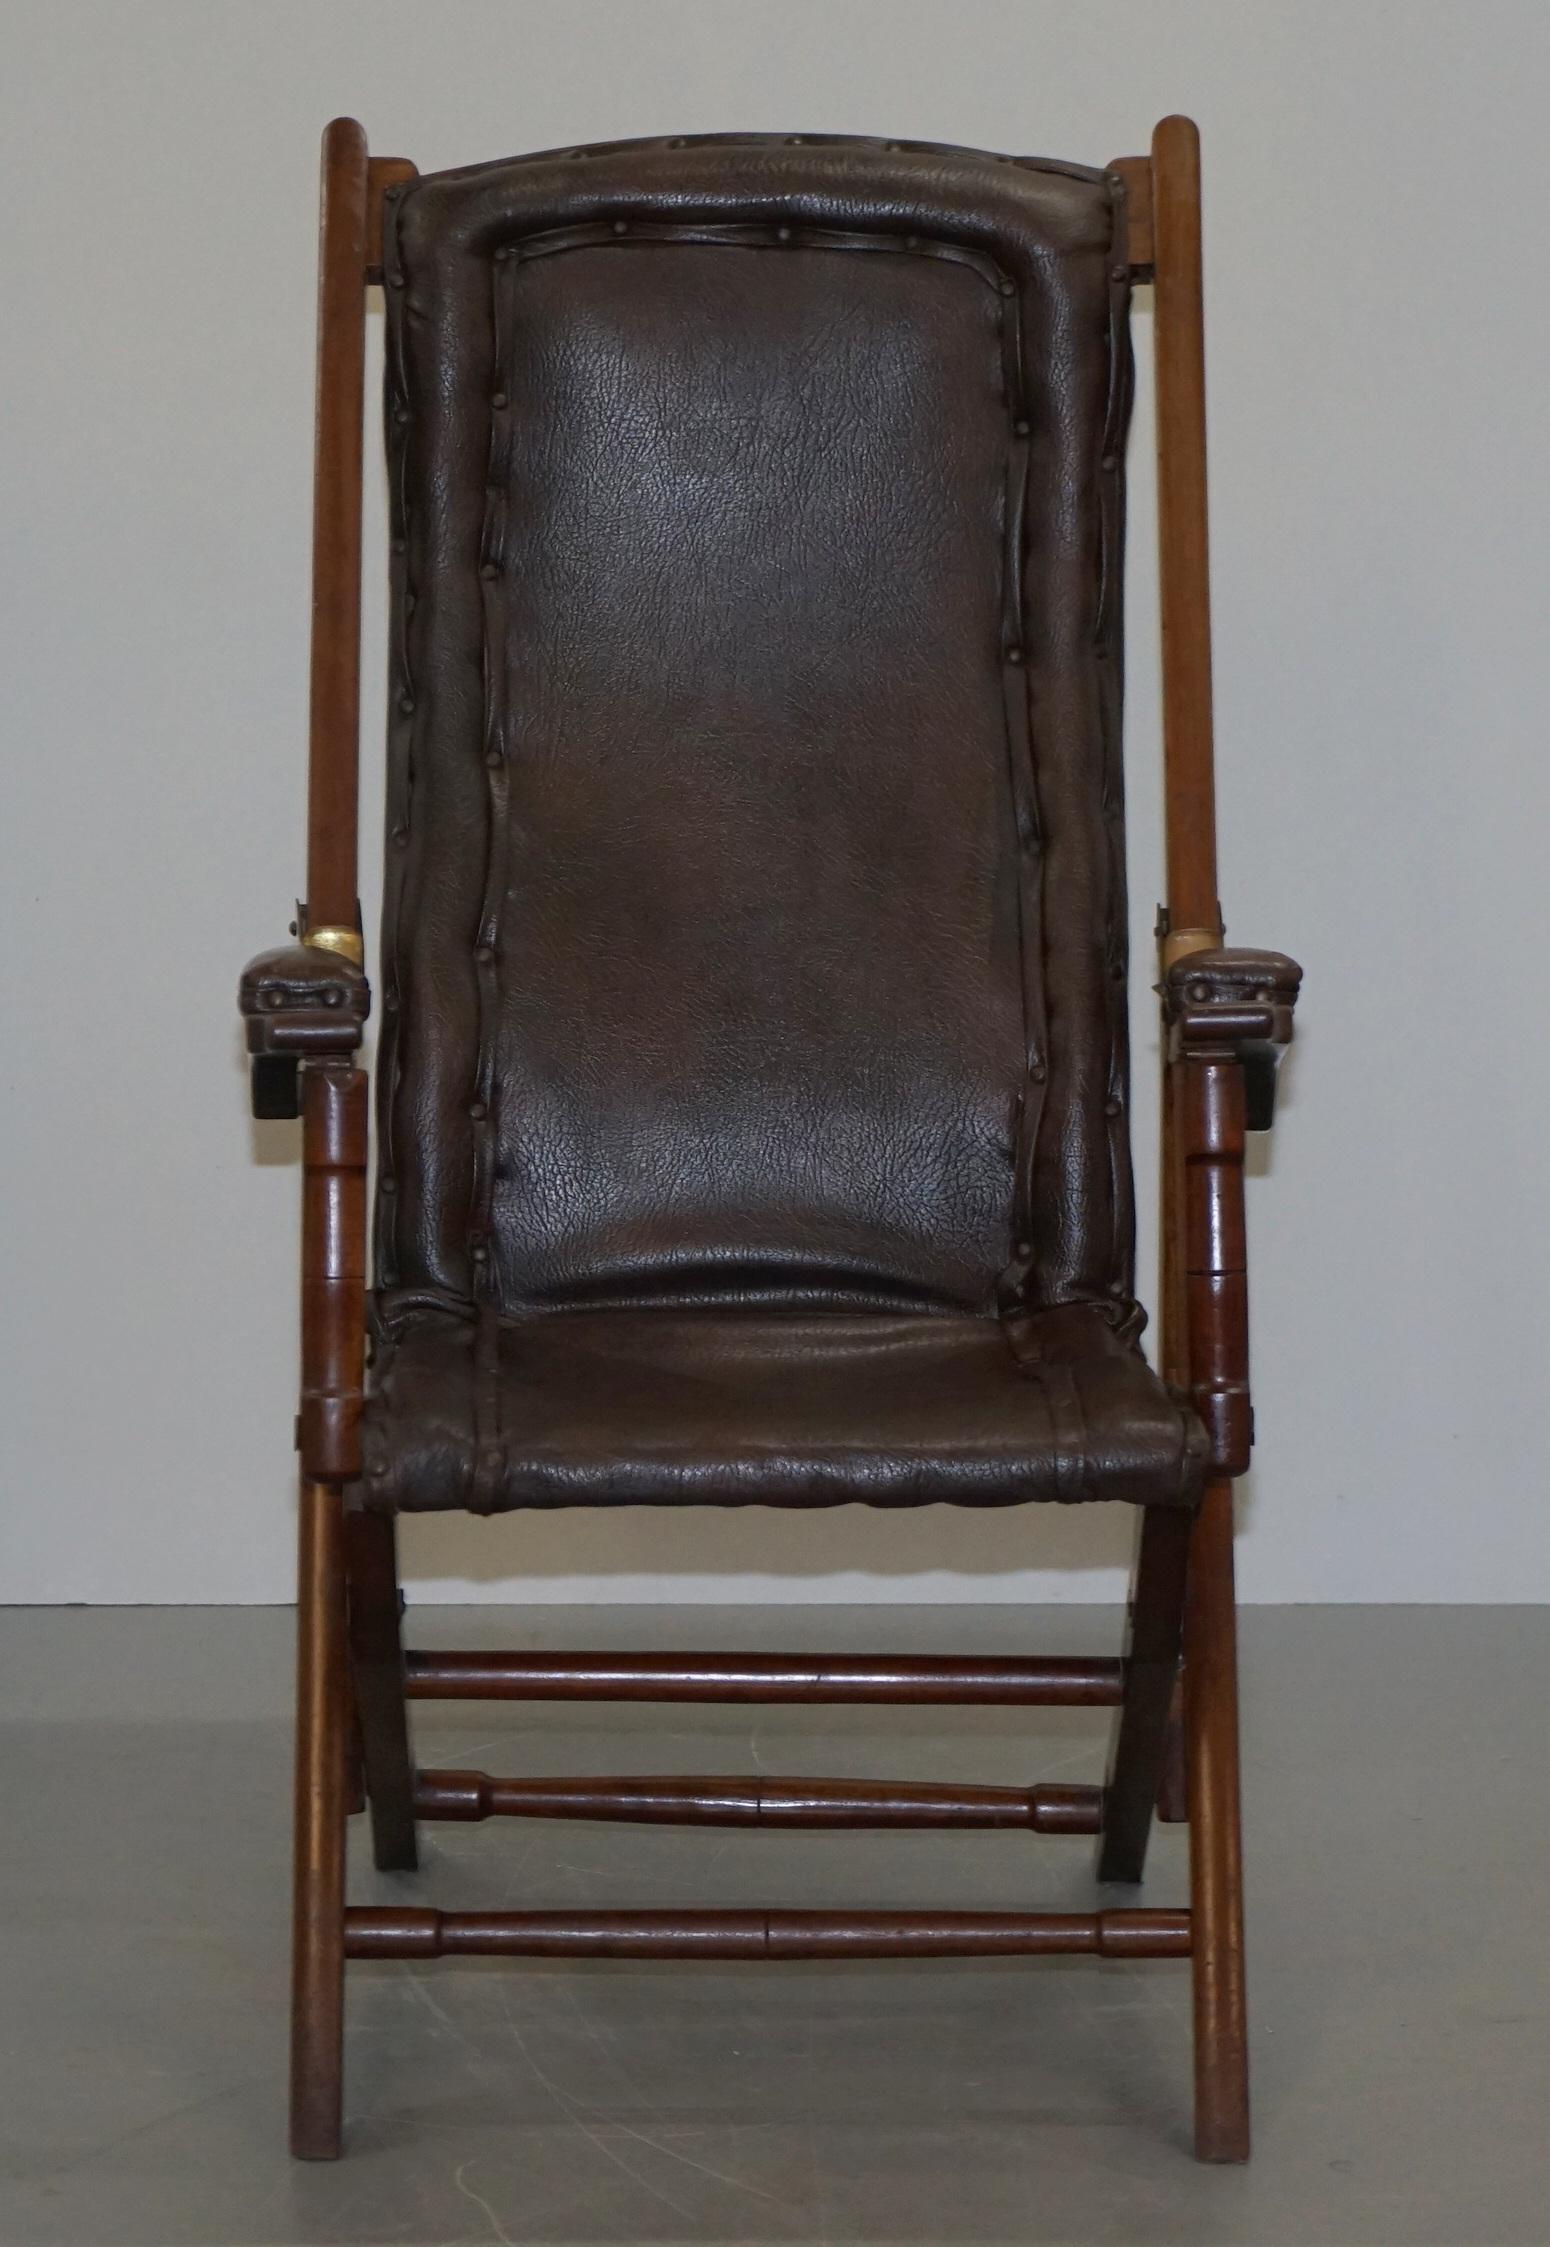 We are delighted to offer for sale this lovely original circa 1890 Military Campaign style folding deck steamer armchair with multiple seating positions

This chair dates back to 1890, it has the original Rexene upholstery which was purposely